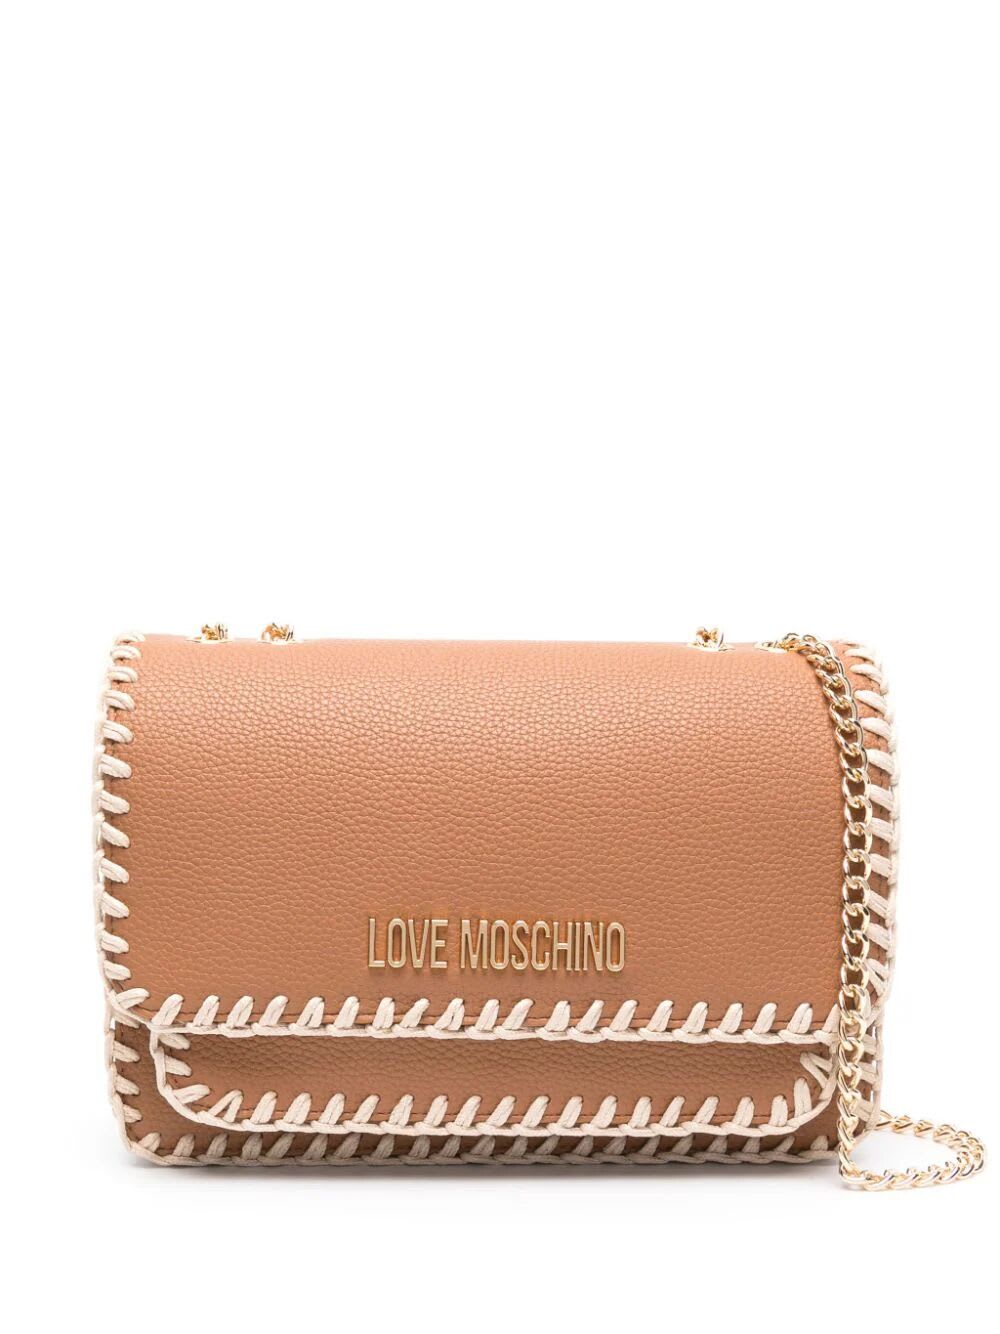 Love Moschino Shoulder Bag In Brown